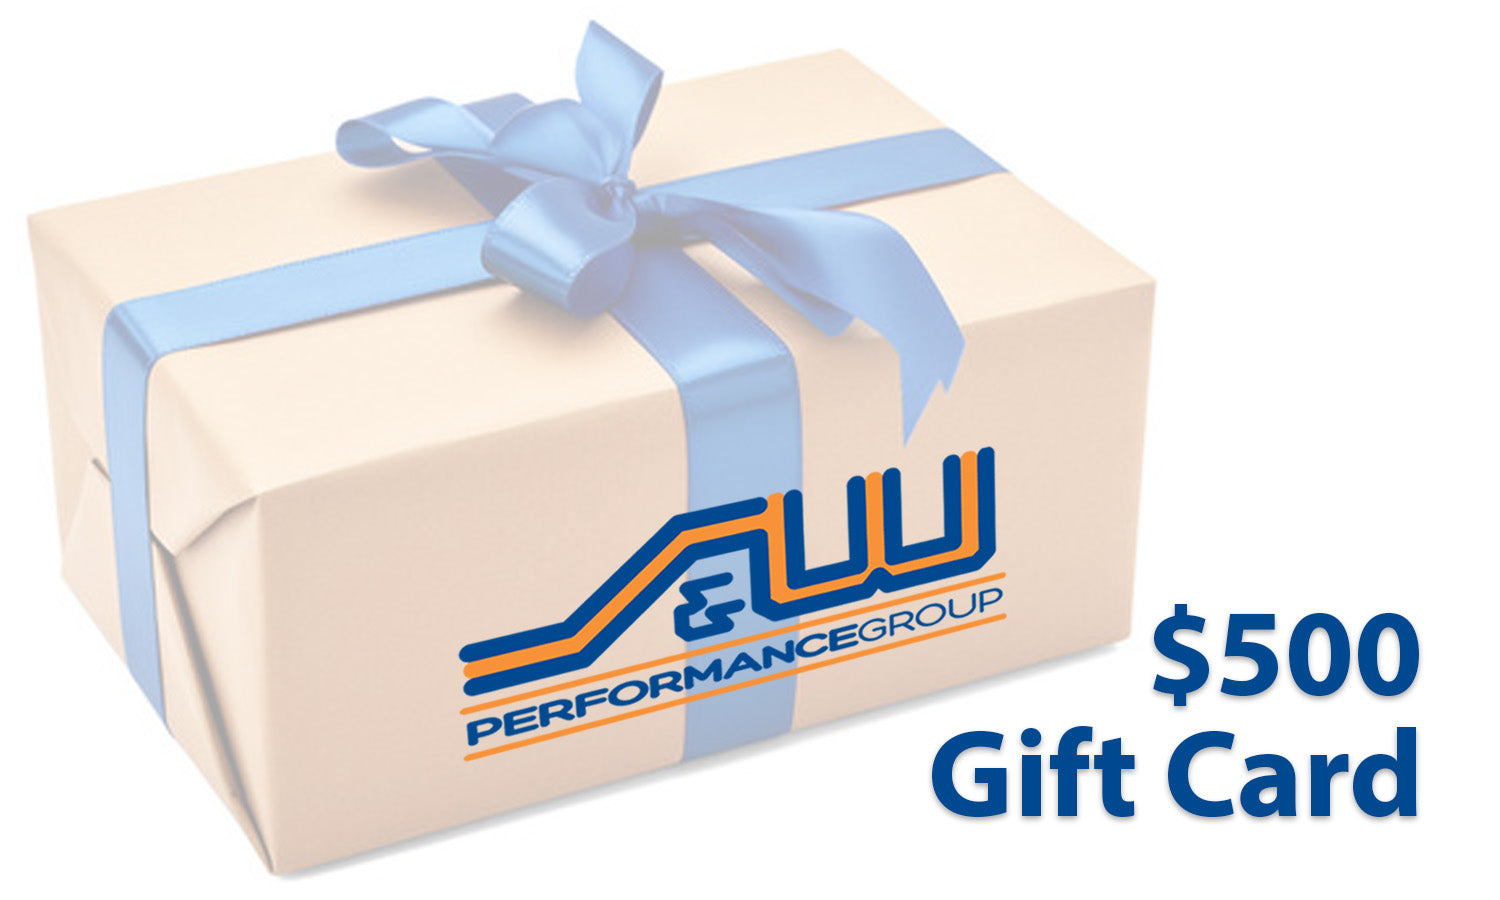 S&W Performance Group $500 Gift Card